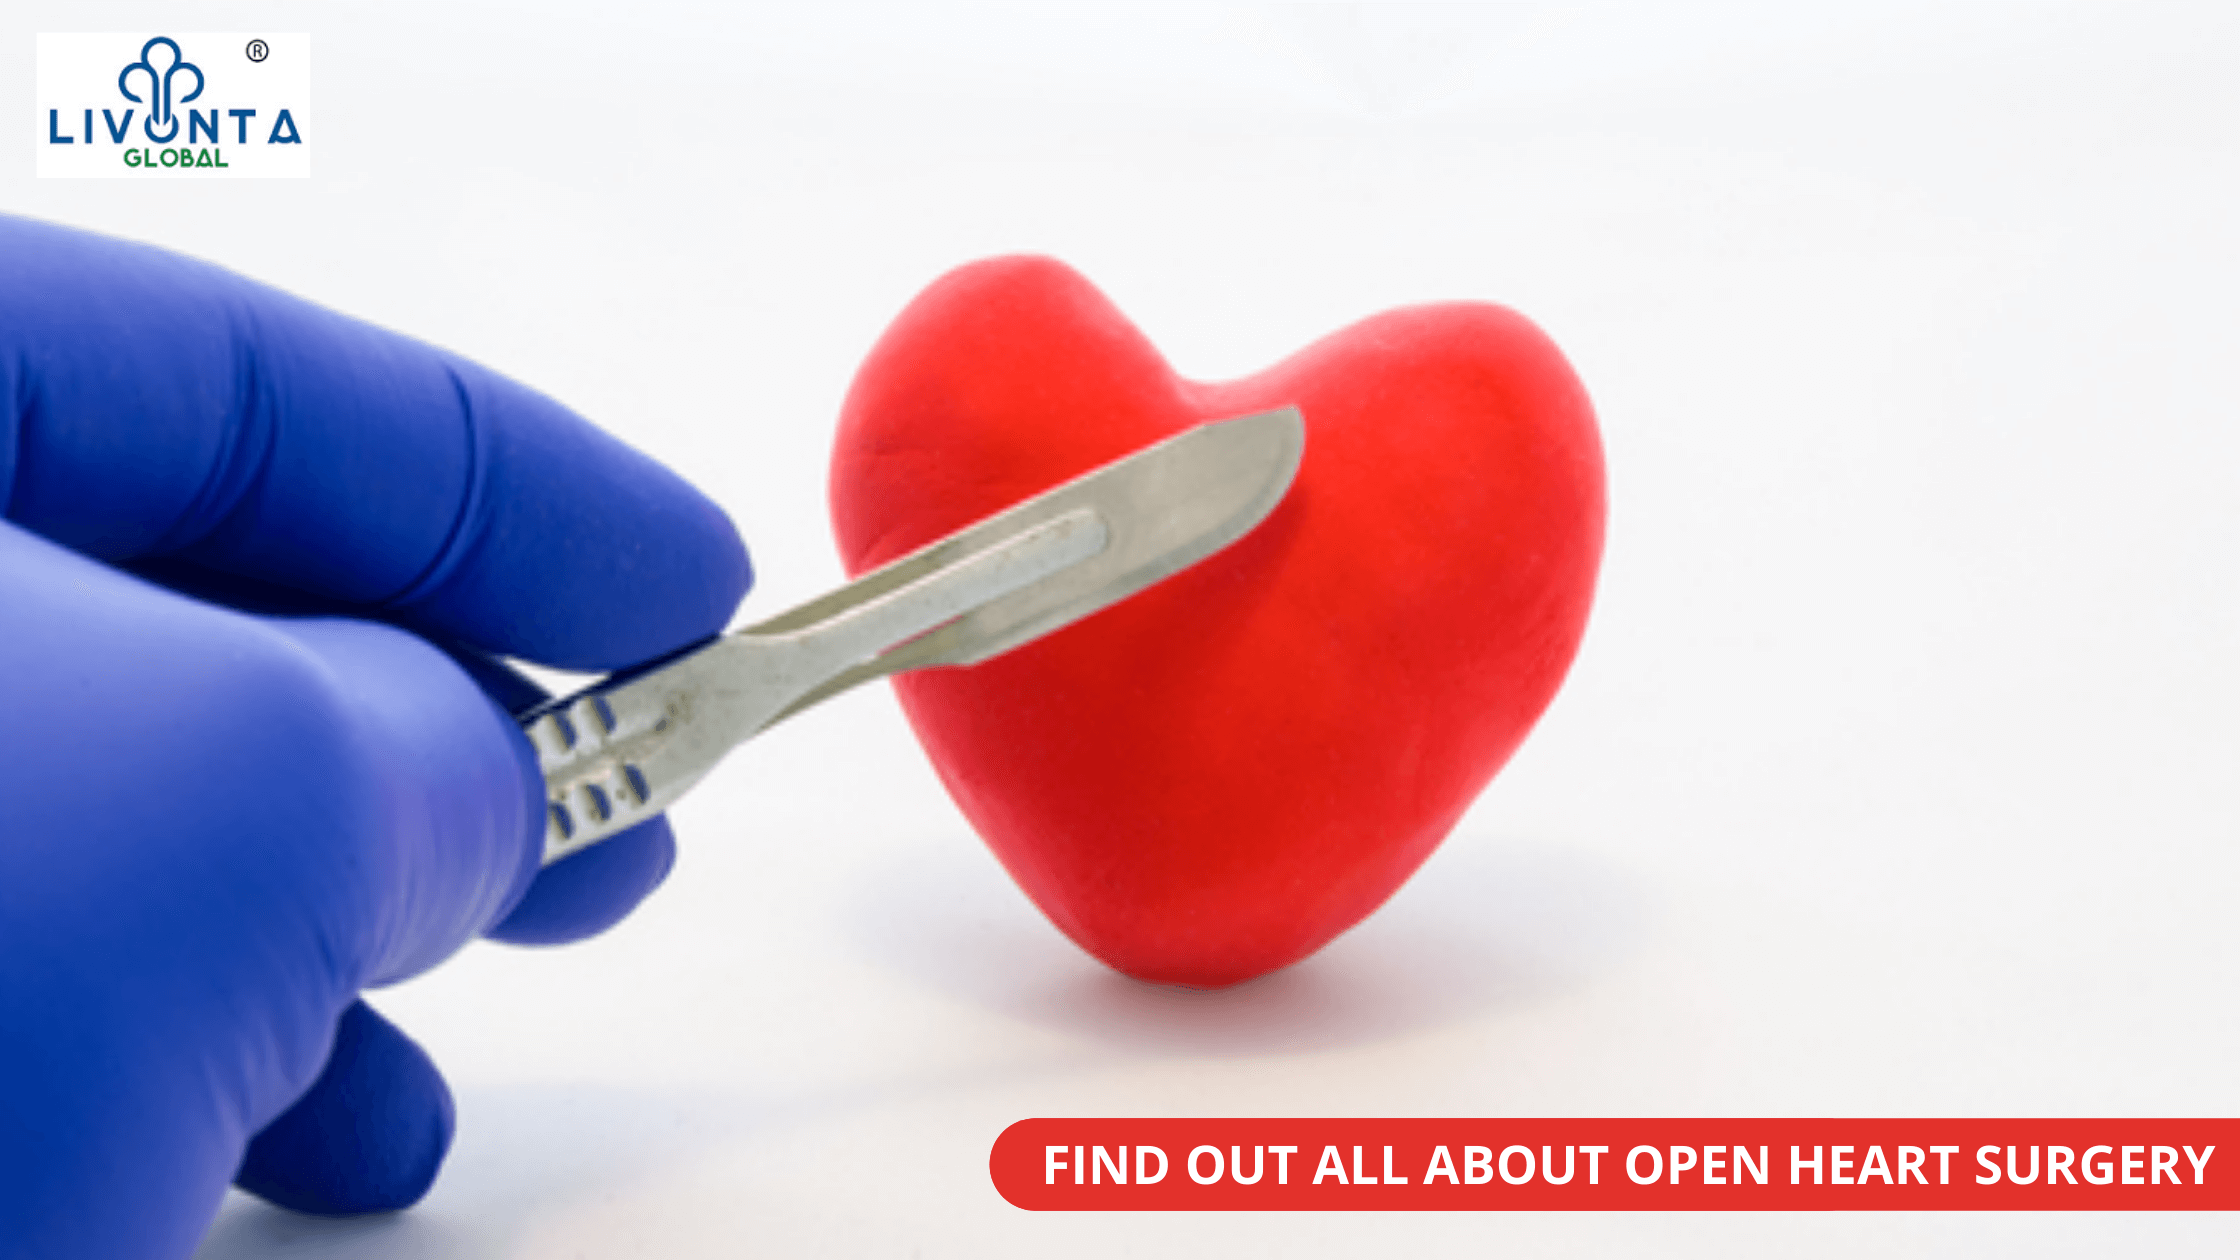 Find out all about open heart surgery